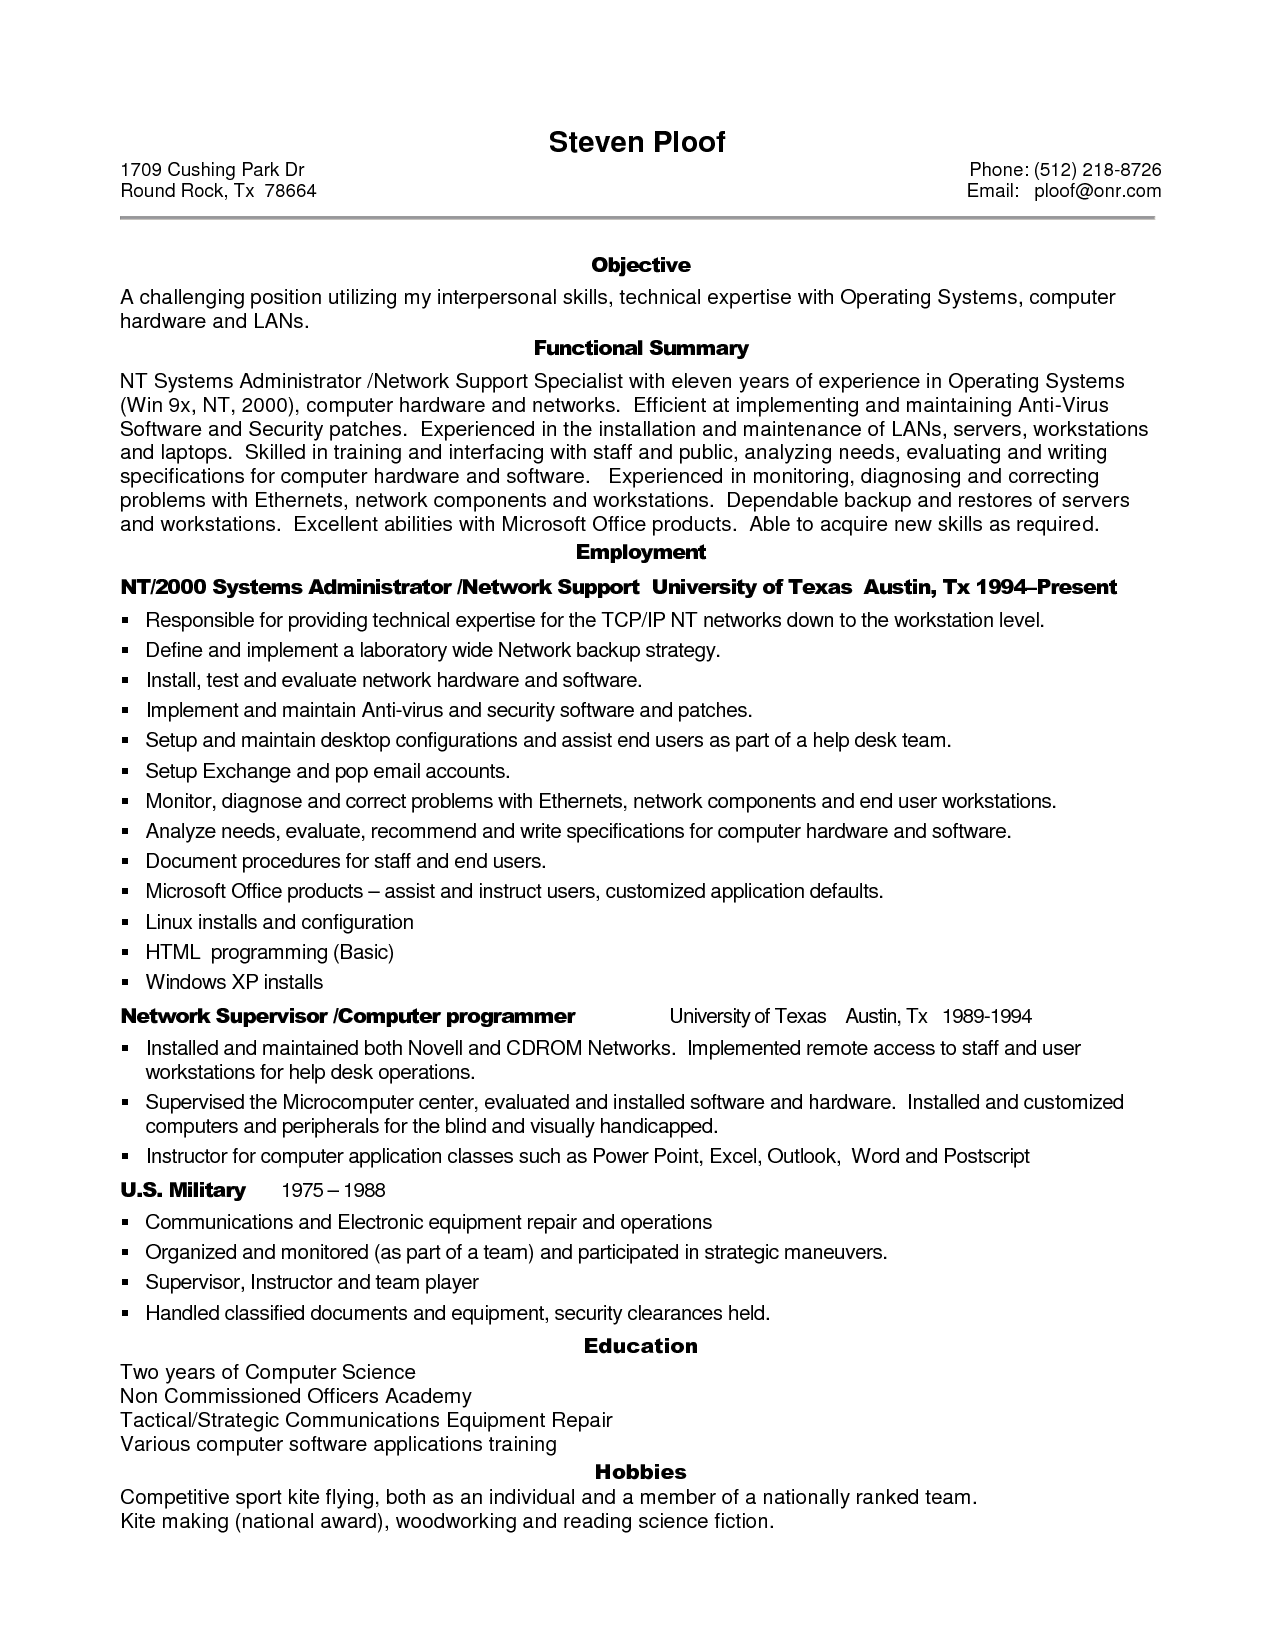 Resume Format For Experienced Professional 